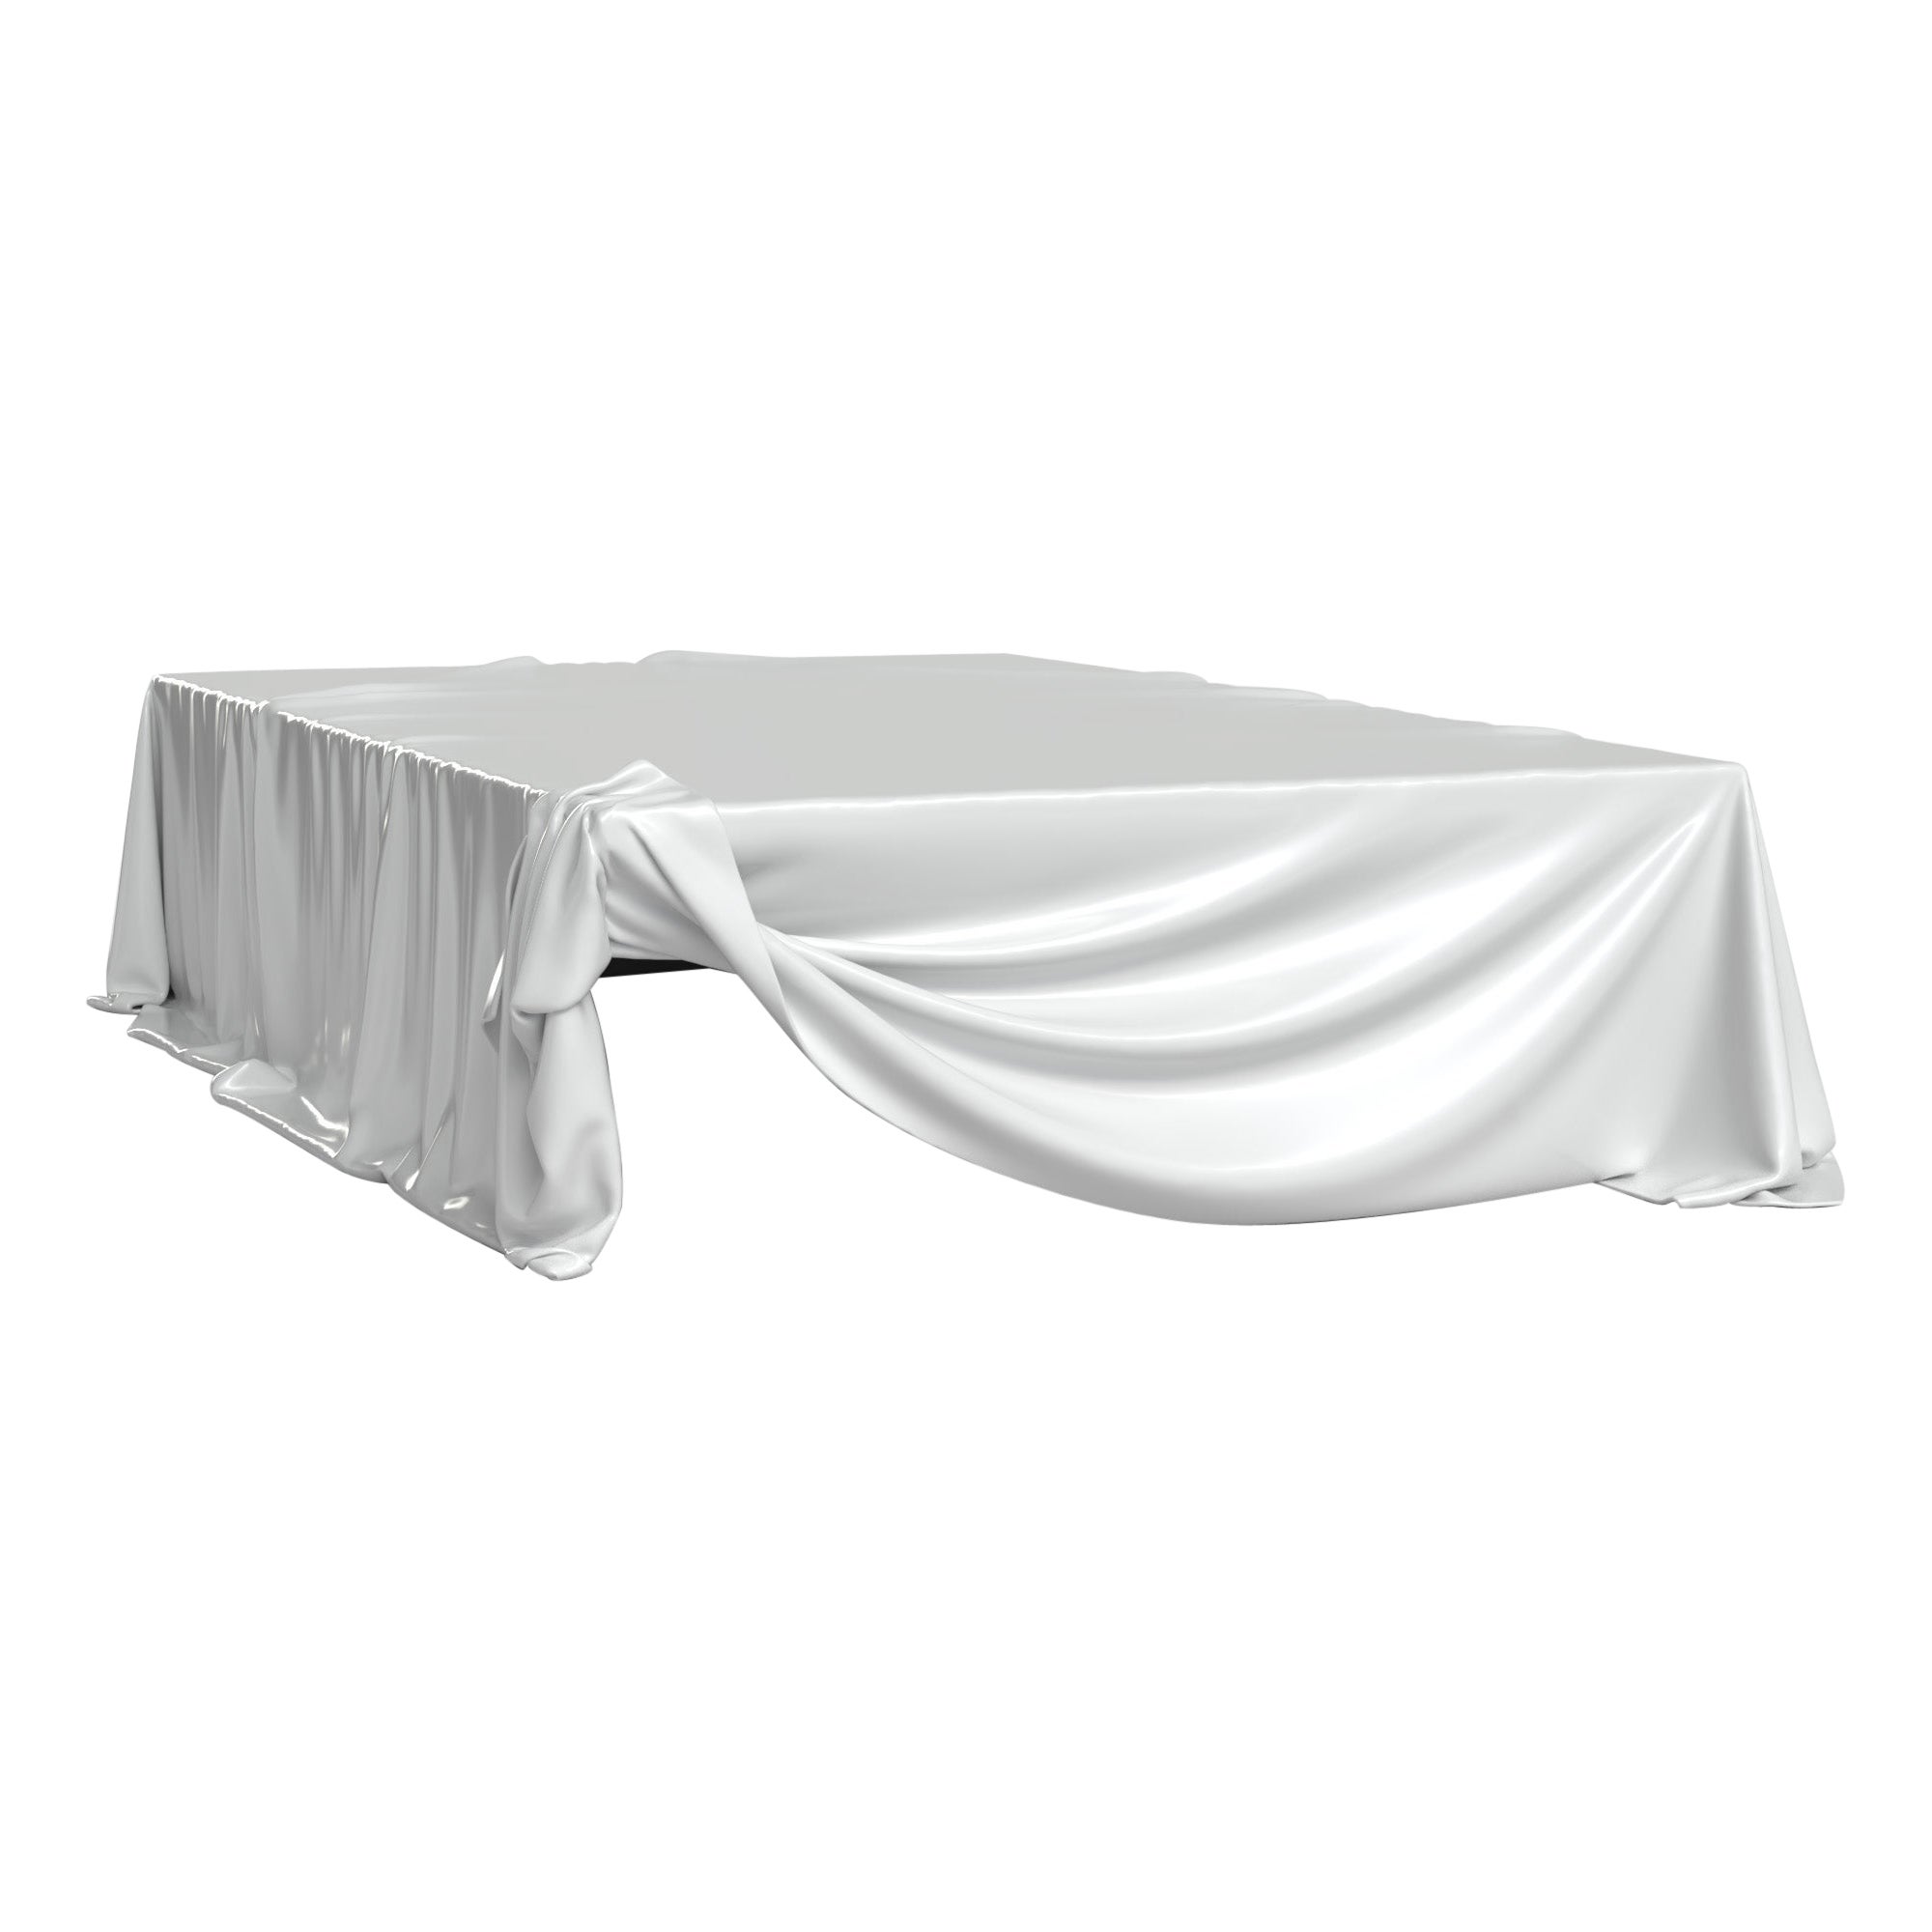 Levitaz Coffee Table in White Gloss For Sale